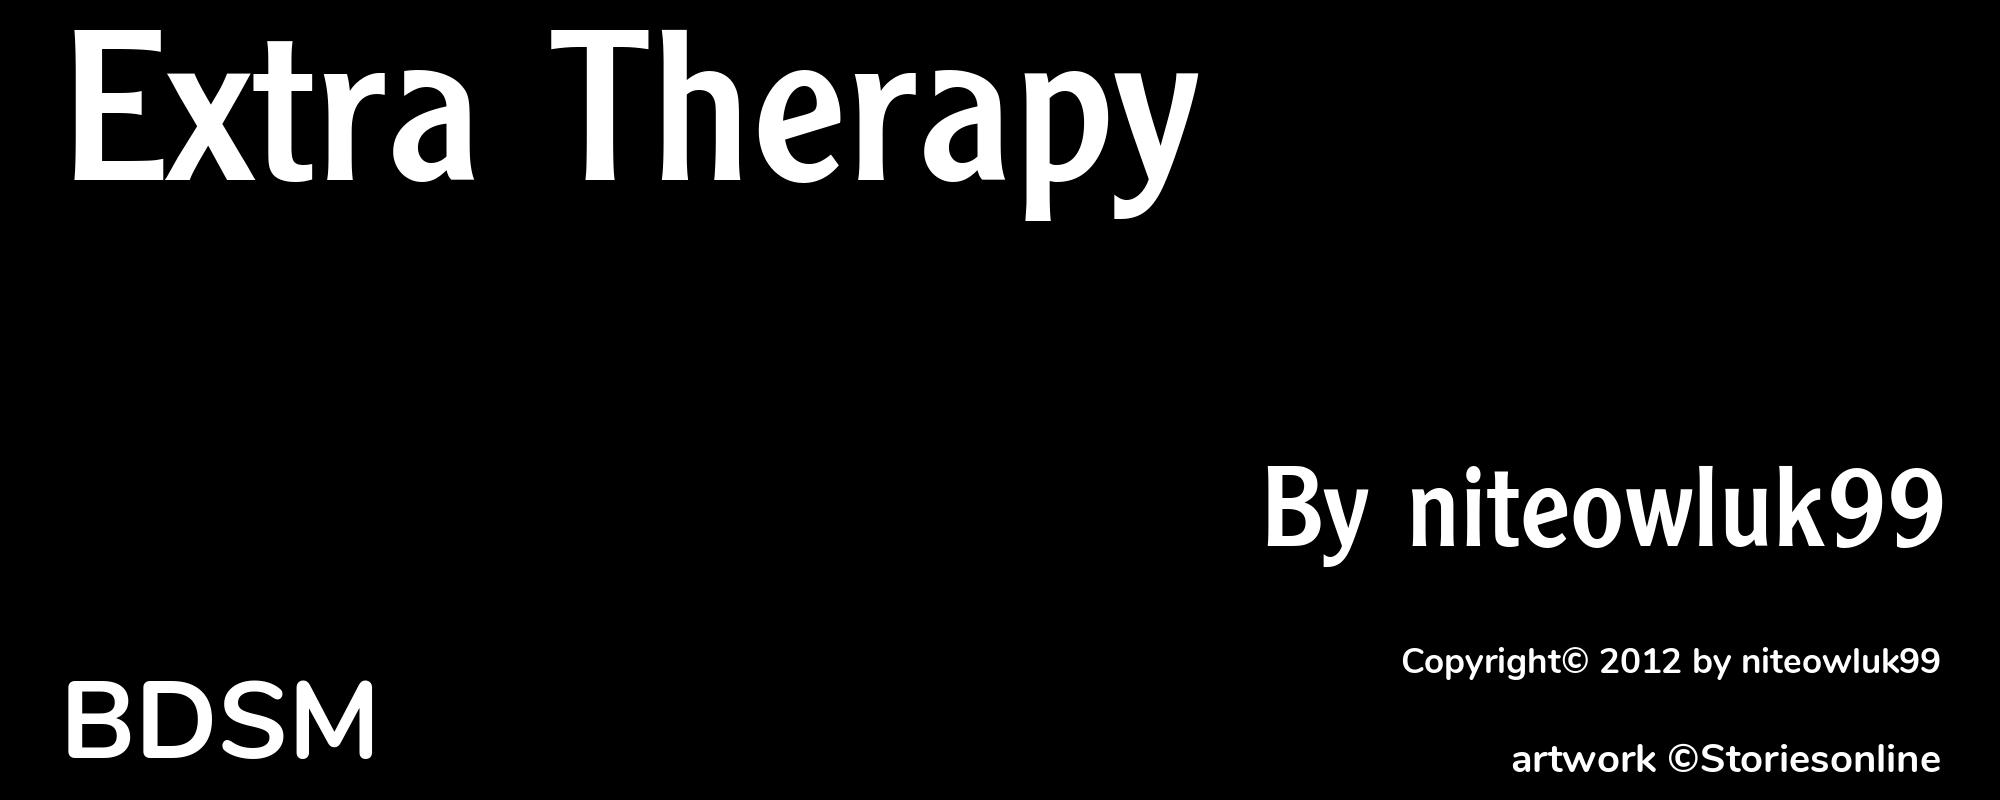 Extra Therapy - Cover